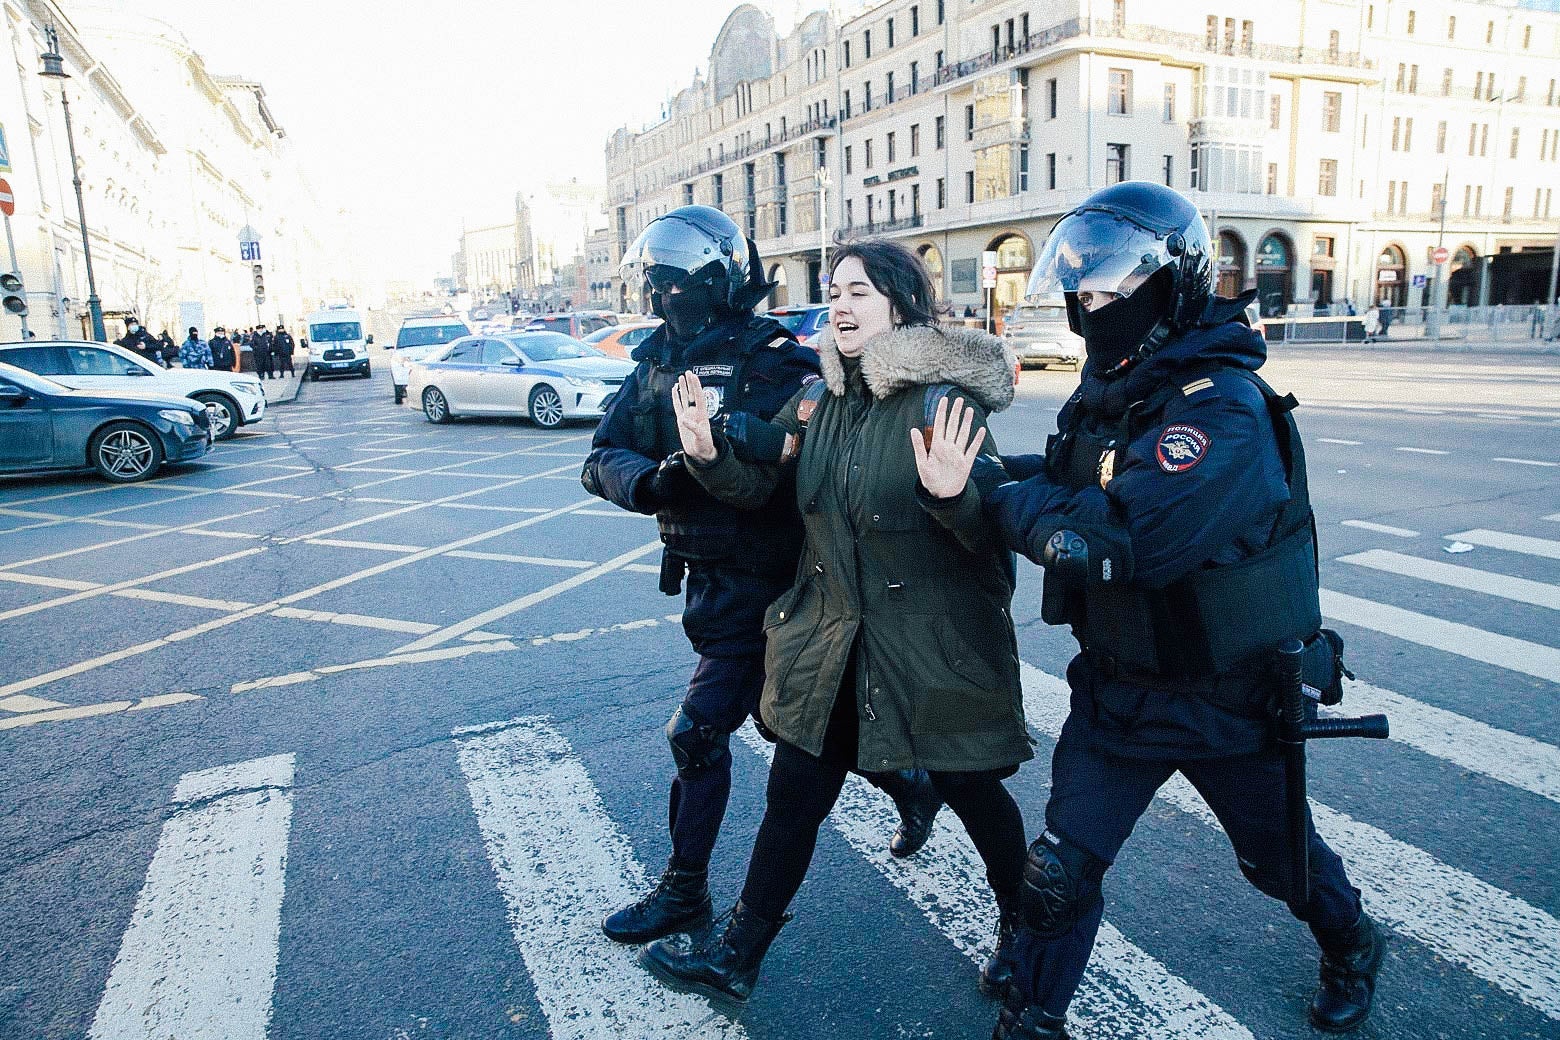 A woman holds up her hands as two police officers in riot gear walk her away.